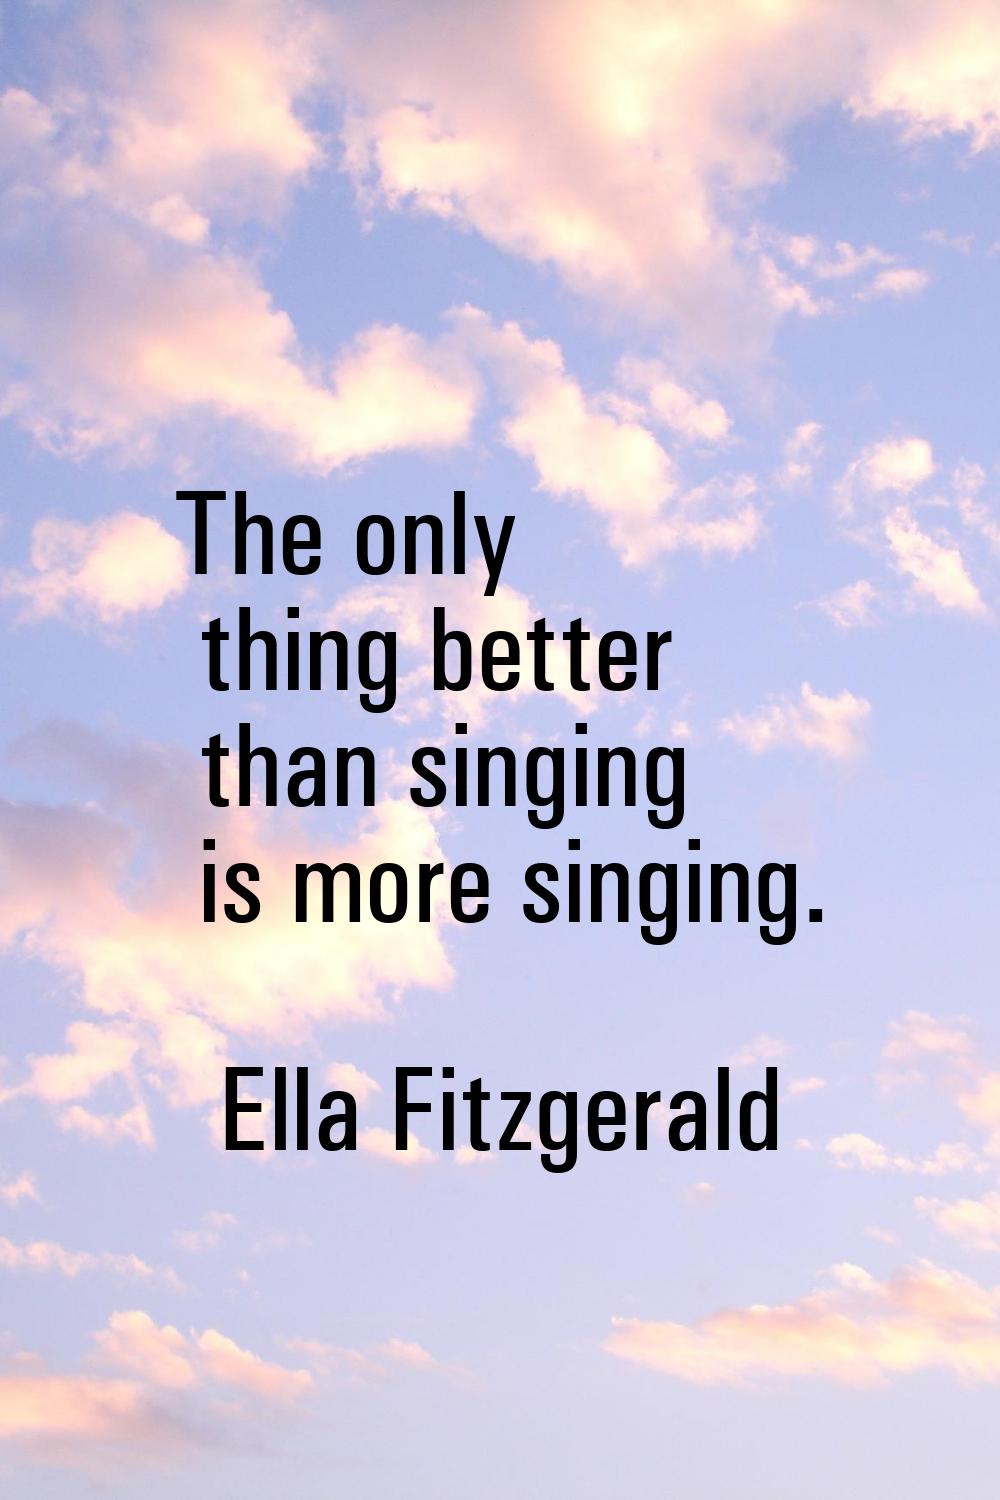 The only thing better than singing is more singing.